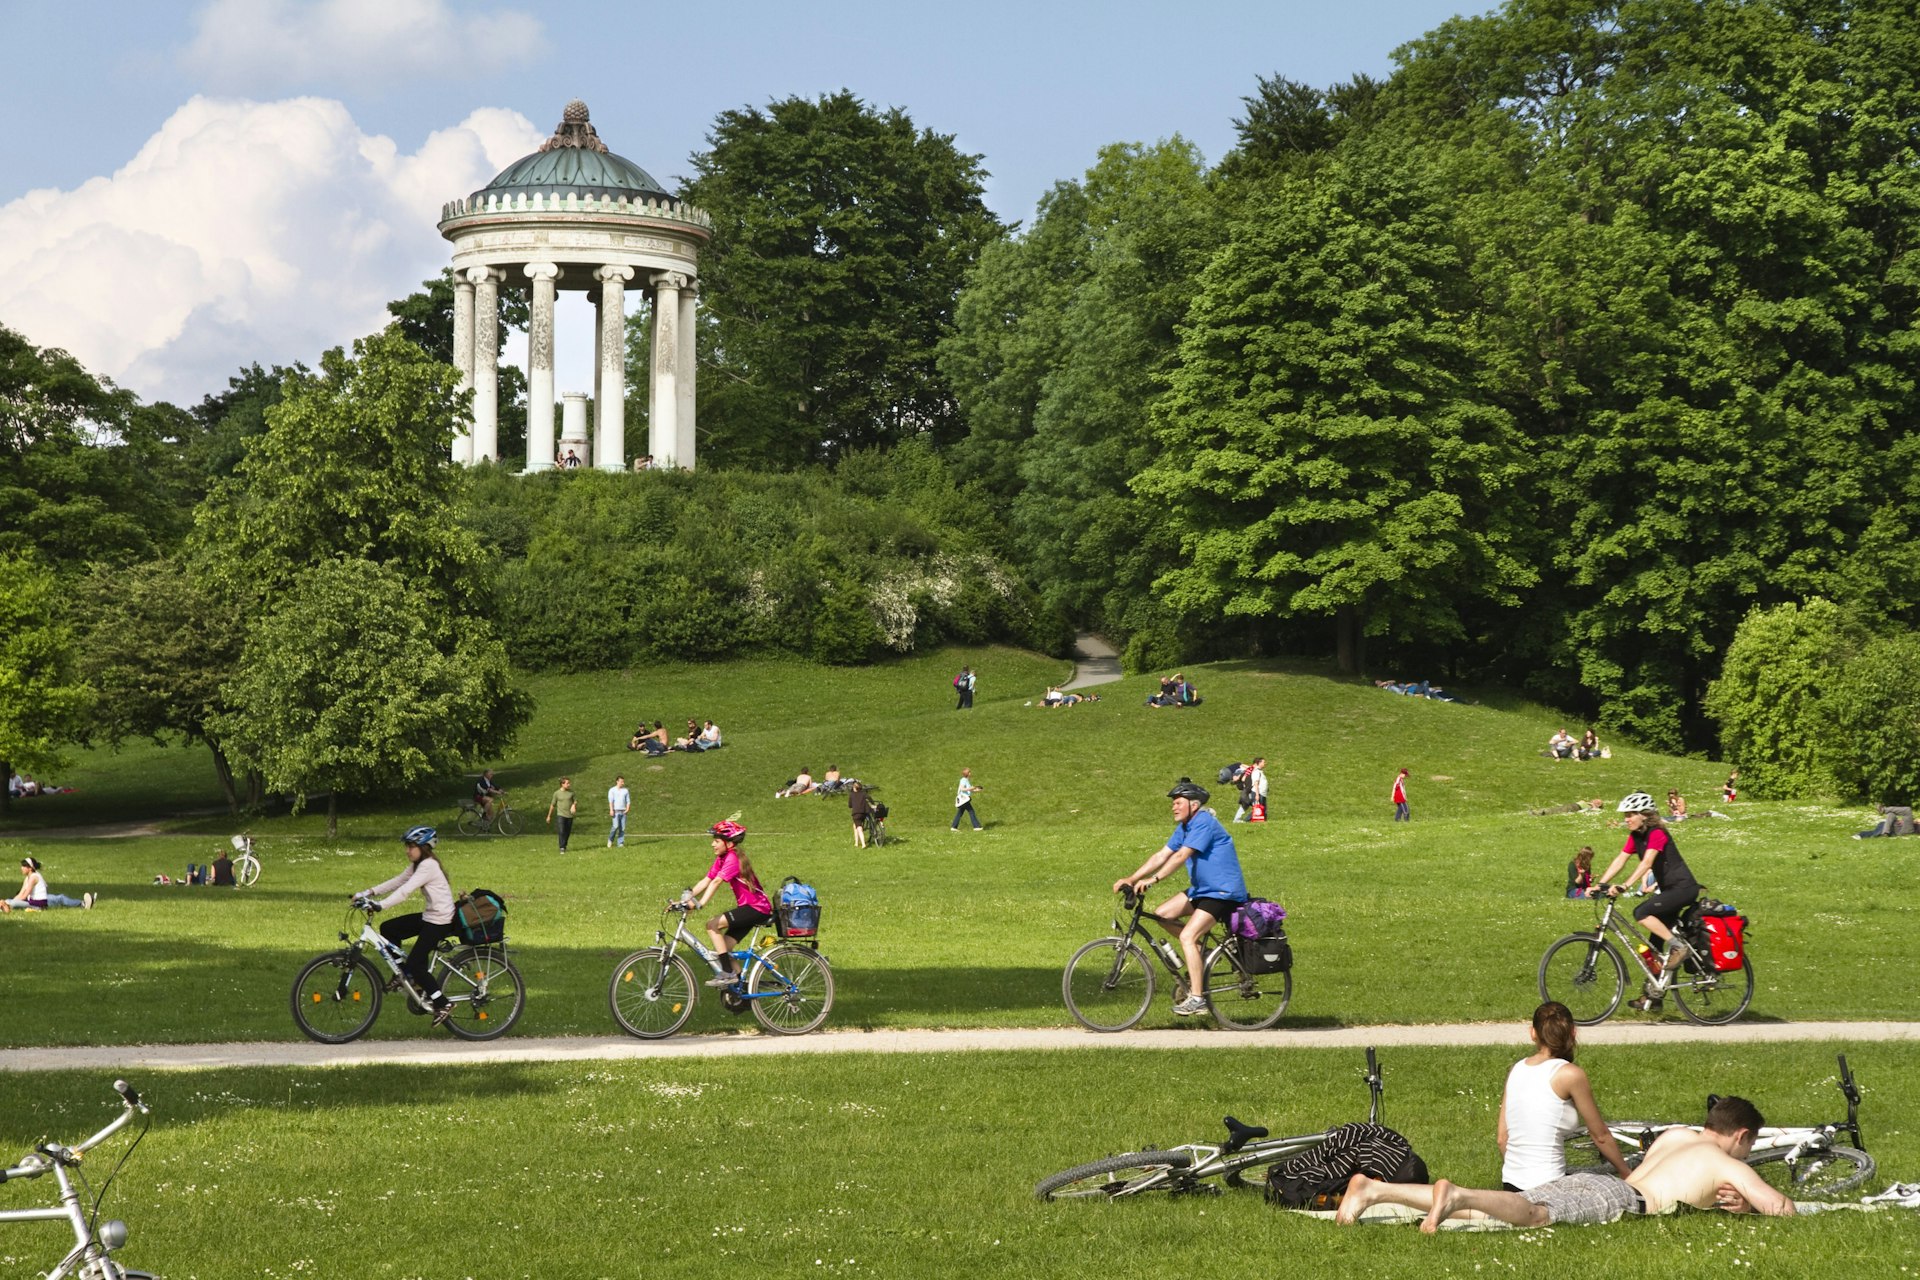 Cyclists on a bike path pedal past sunbathers and picnickers on the lawns of the English Garden, Munich